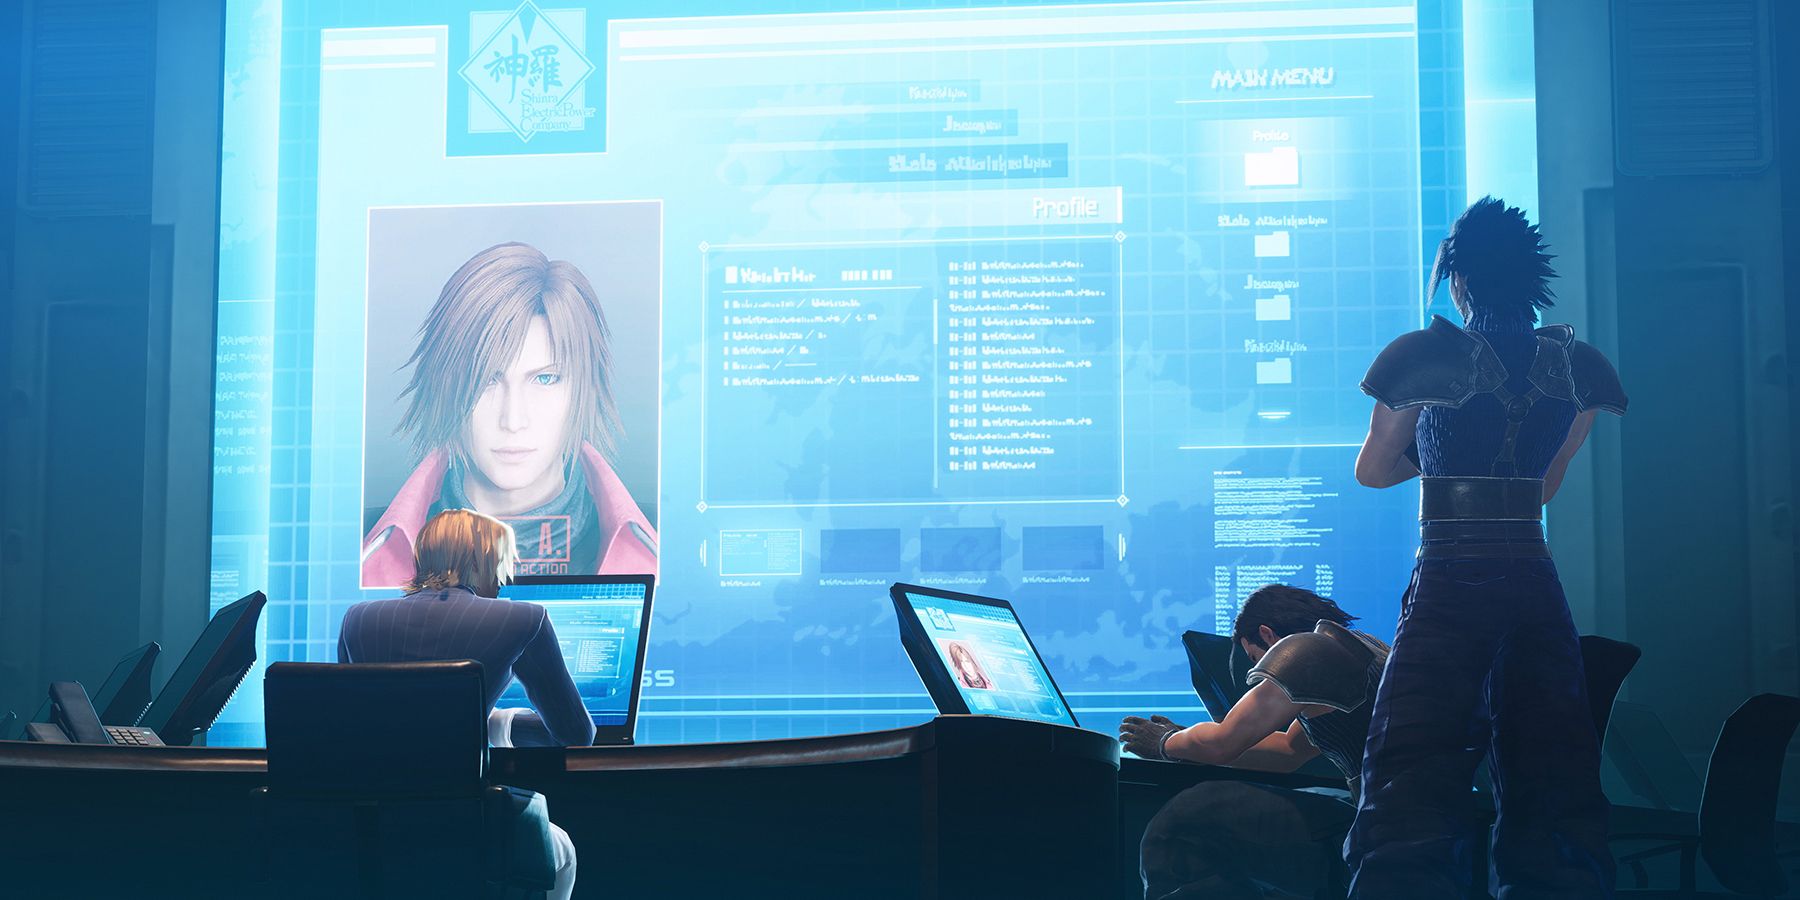 final fantasy 7 crisis core reunion characters at computers with big screen